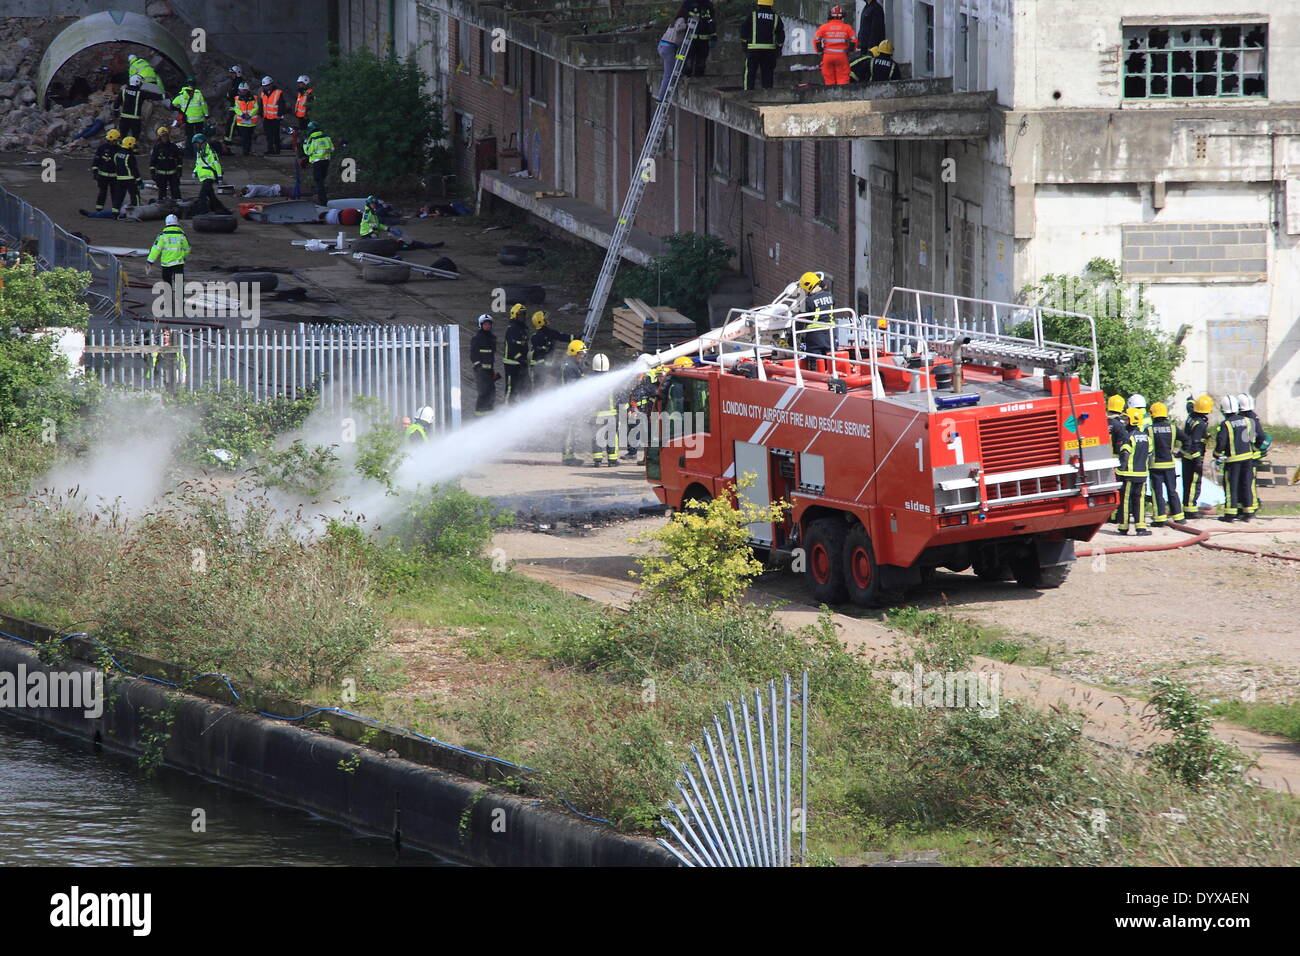 London, UK. 26th Apr, 2014. Saturday saw Firefighters were amongst over 220 emergency services personnel taking part in a large exercise in East London. The simulated crash of a Boeing 737 into a building, provided rescuers with over 100 casualties to rescue. A number of casualties were plucked from water by rescue boats. The exercise is due to last three days. Credit:  HOT SHOTS/Alamy Live News Stock Photo